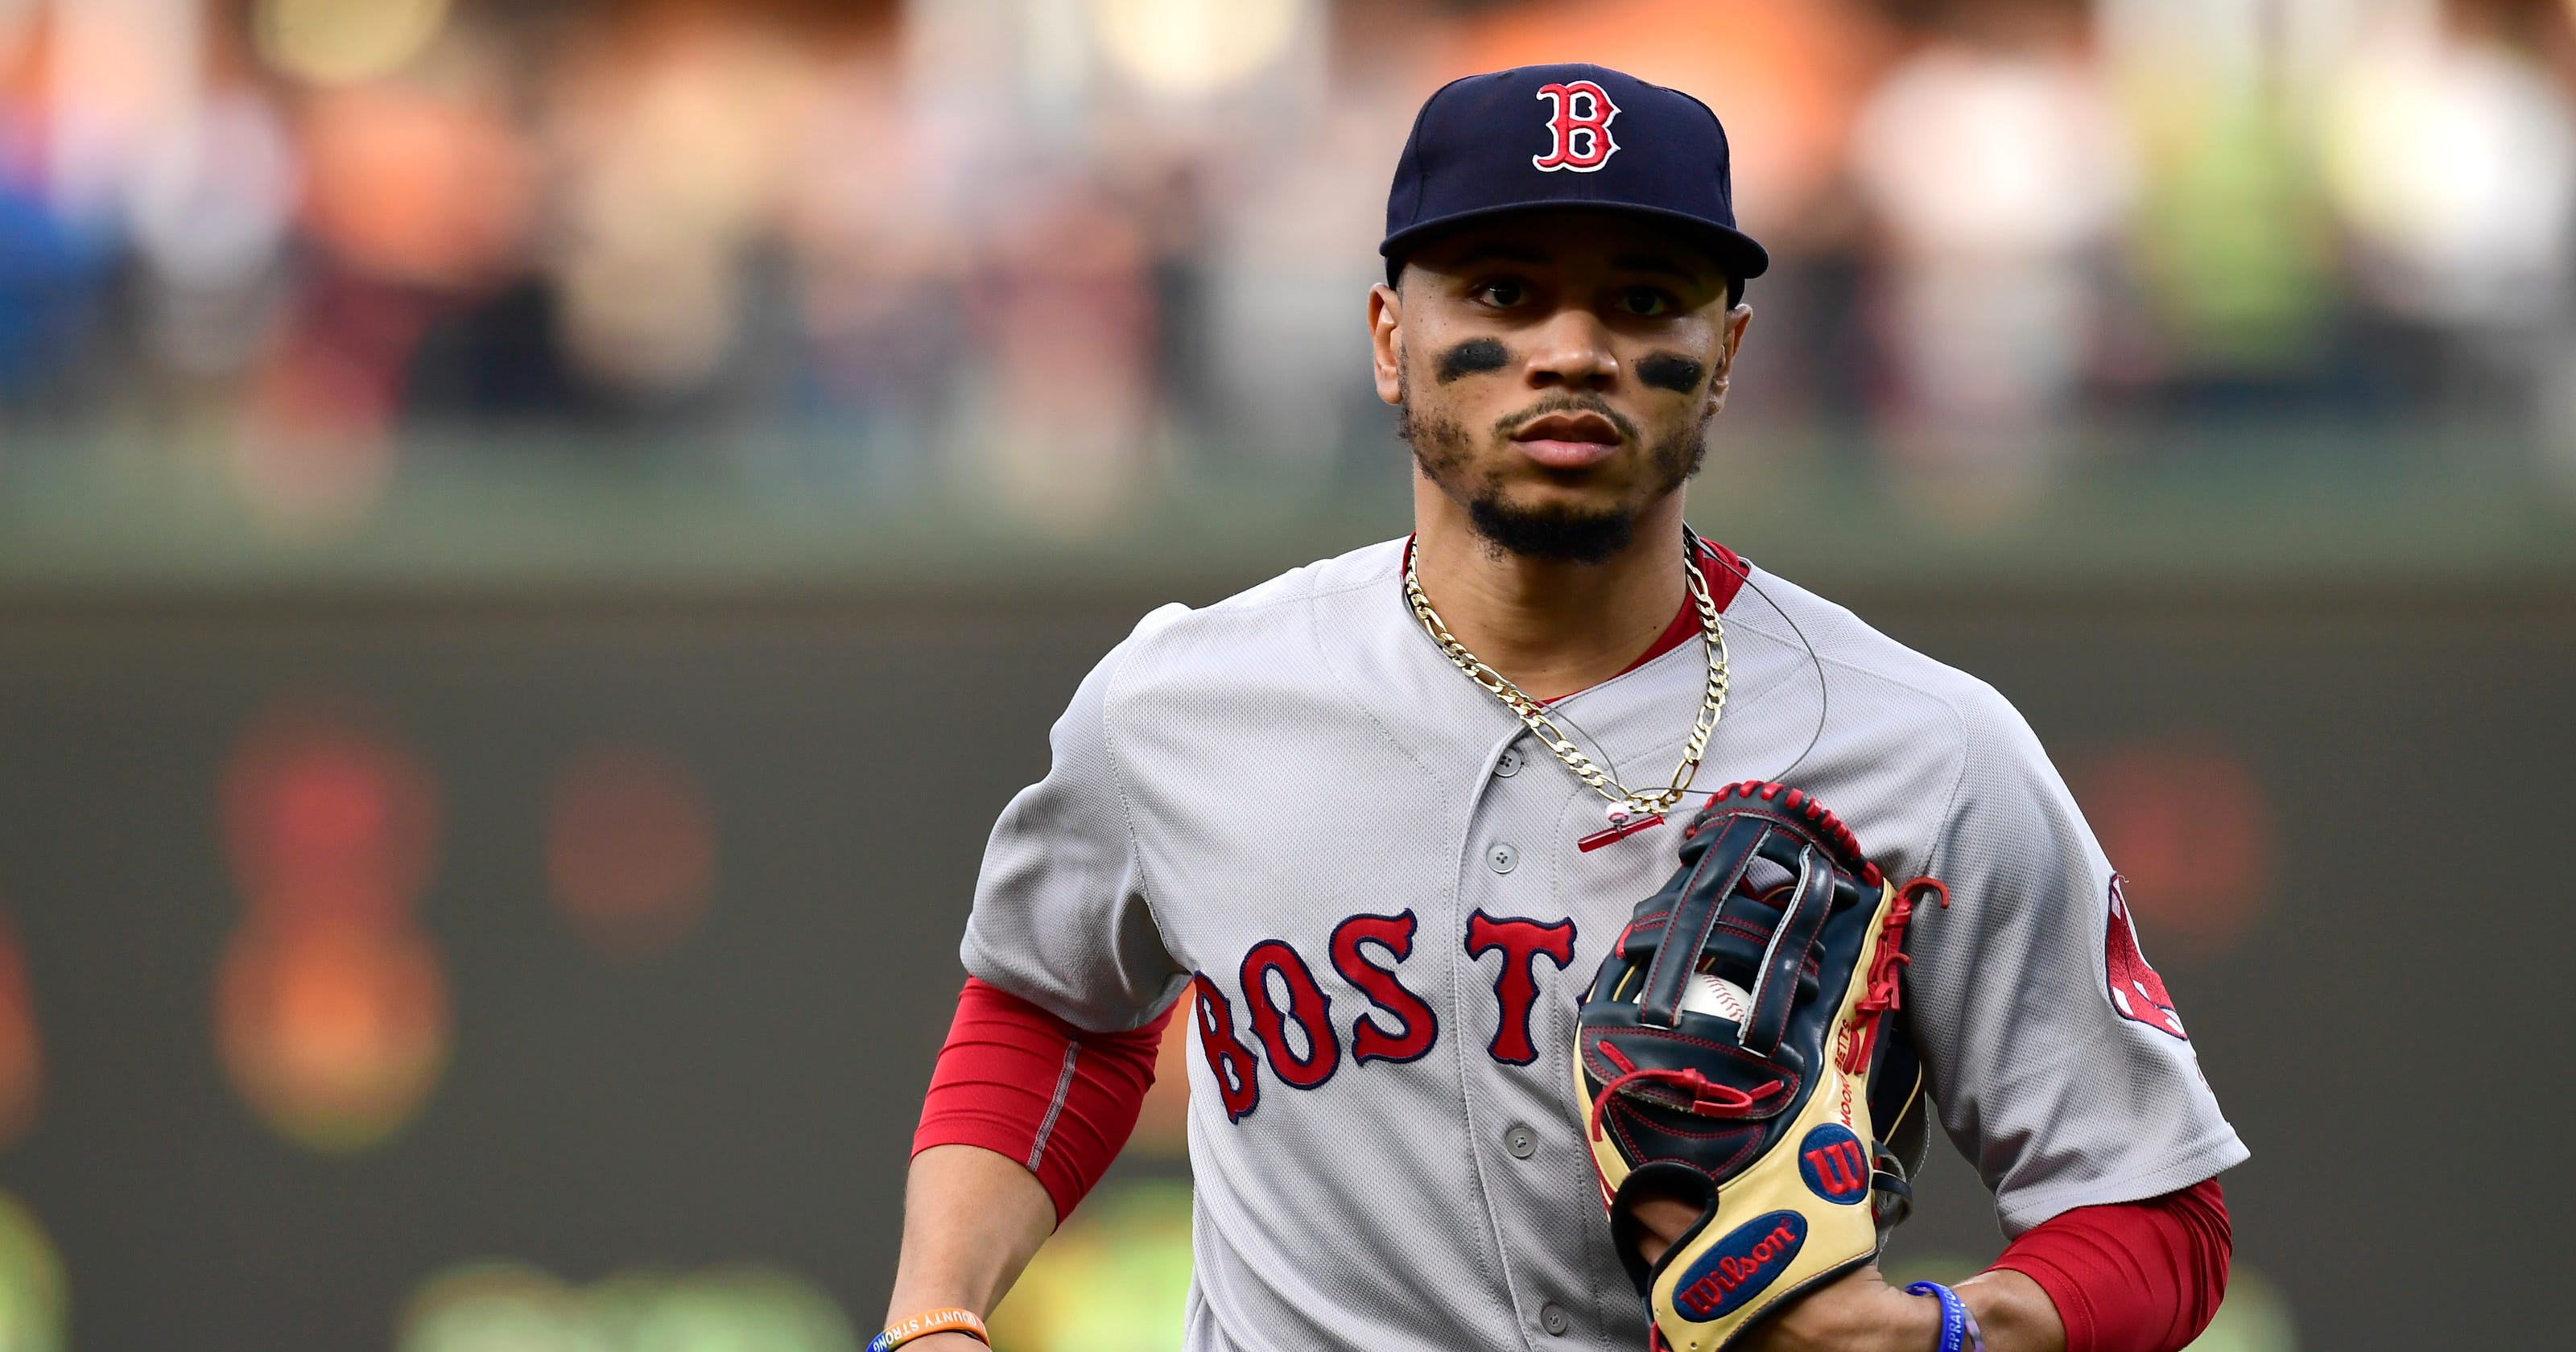 All-Star Game: Mookie Betts is the top vote-getter in the AL